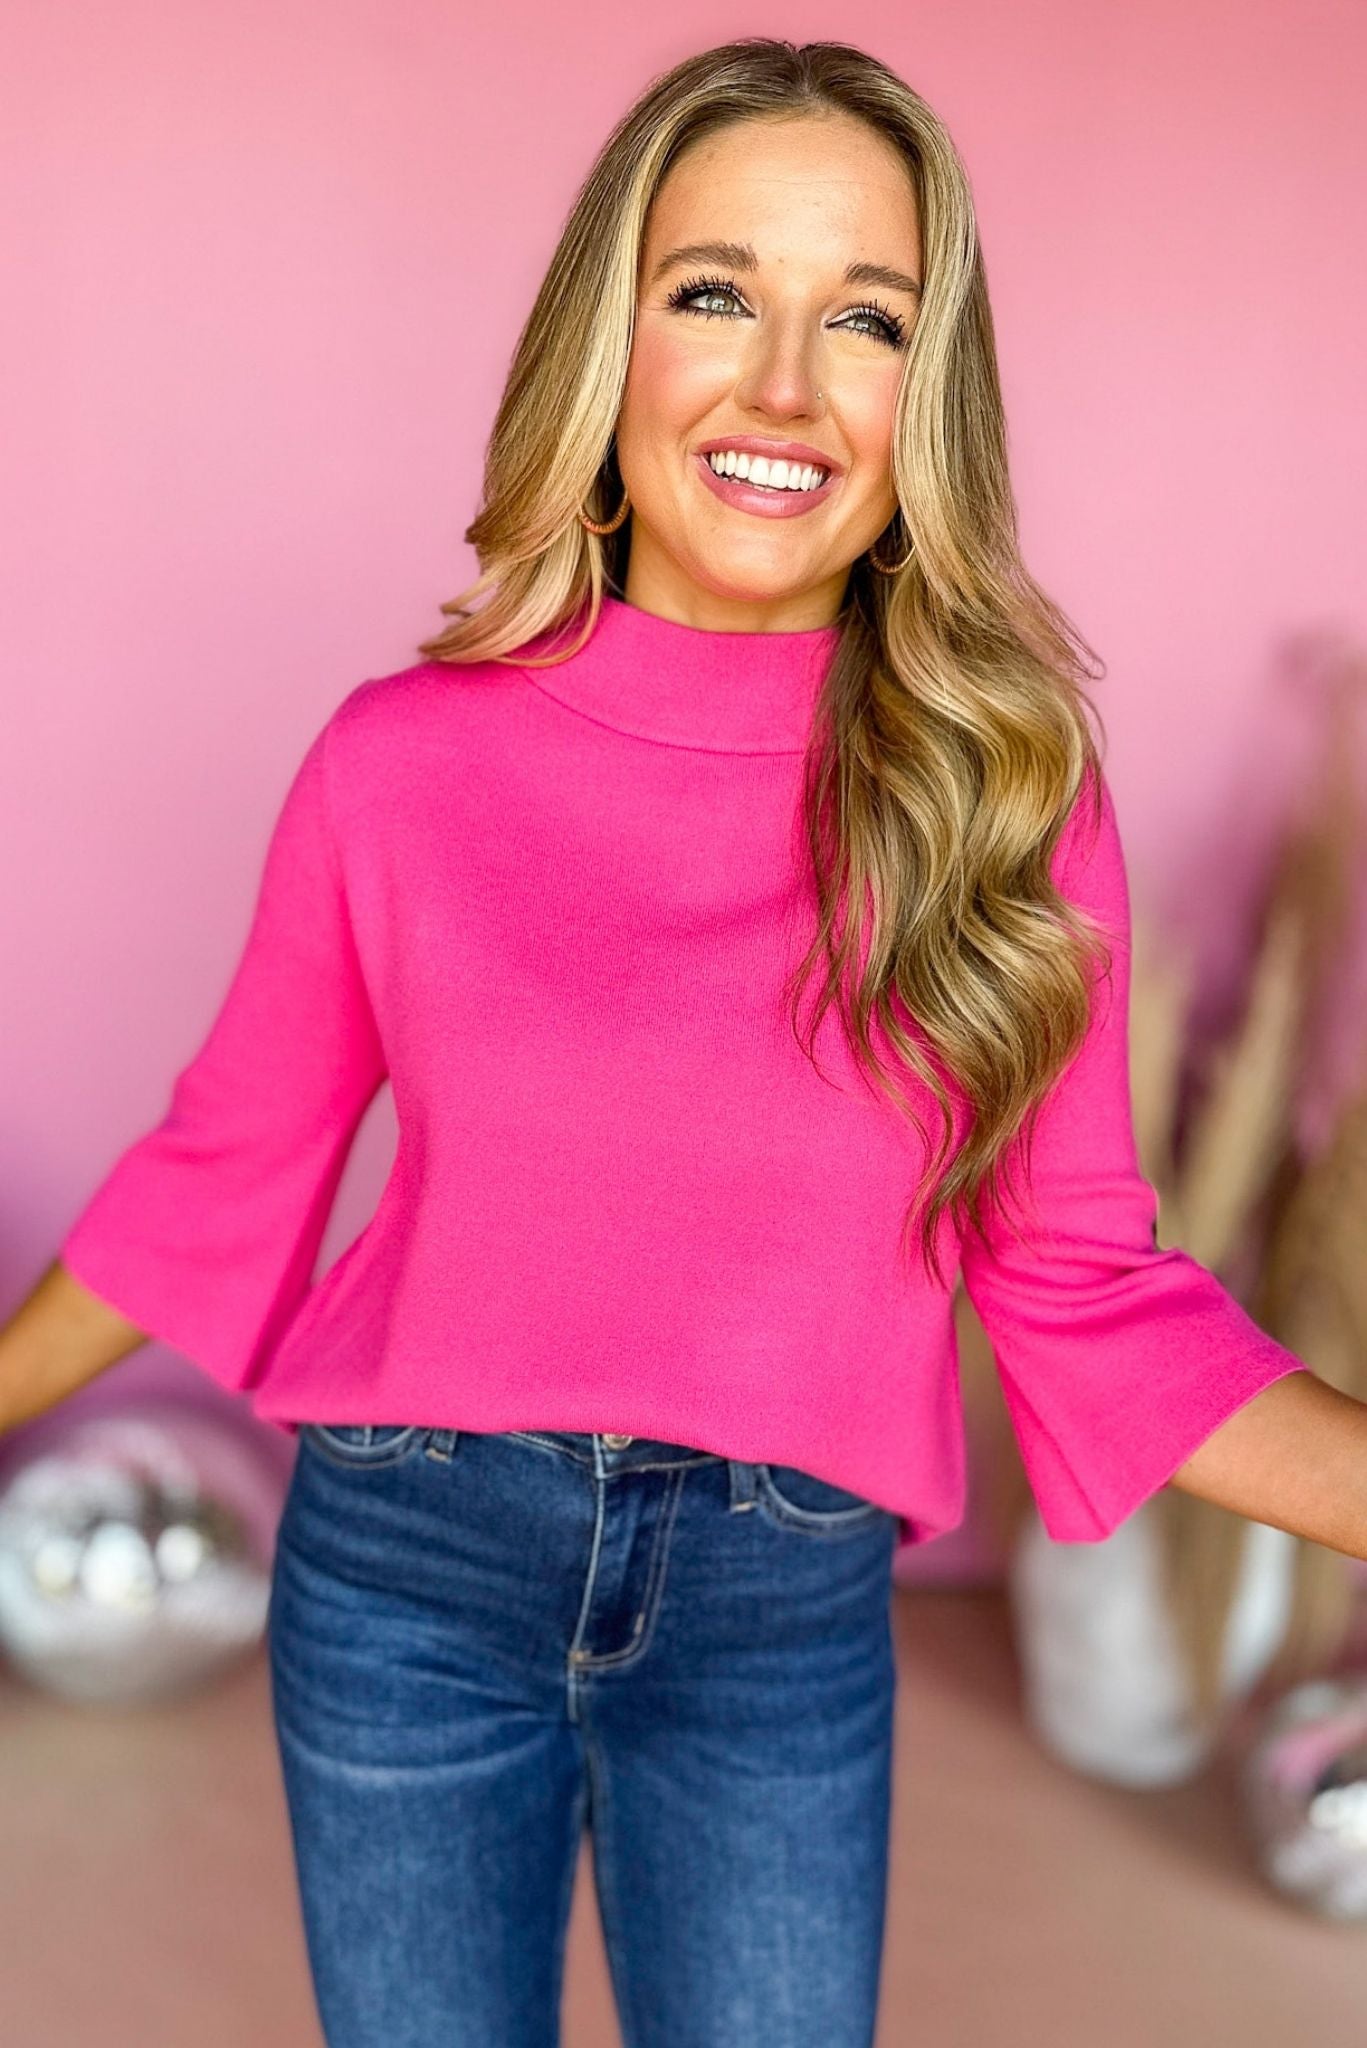 Load image into Gallery viewer, Fuchsia Mock Neck Bell Sleeve Sweater, elevated style, elevated basic, bell sleeve detail, must have basic, must have sweater, mom style, fall fashion, fall style, affordable fashion, shop style your senses by mallory fitzsimmons
